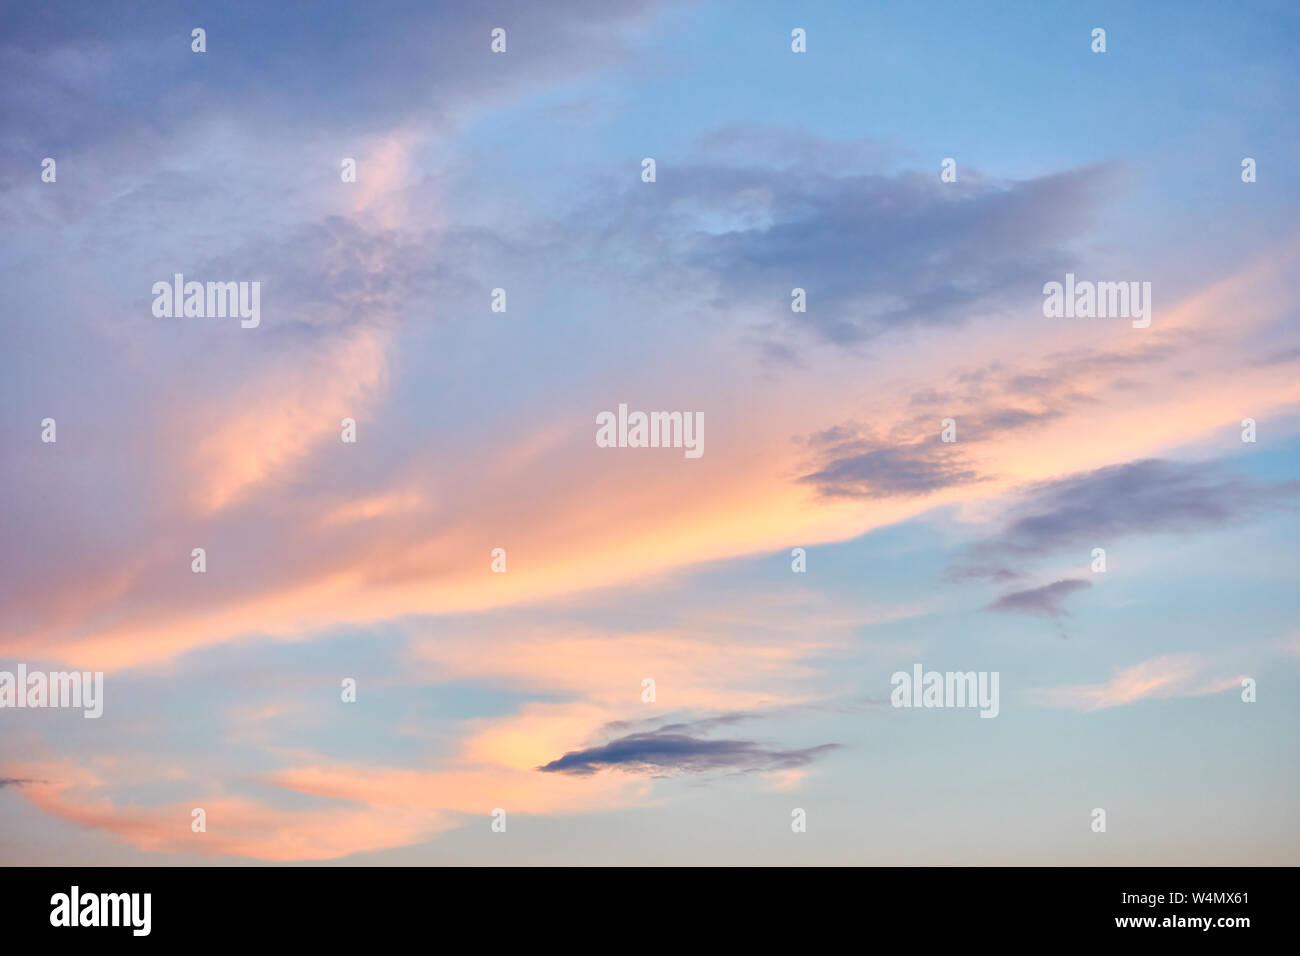 Beautiful Sunset Sky With Colorful Clouds Natural Background Stock Photo Alamy